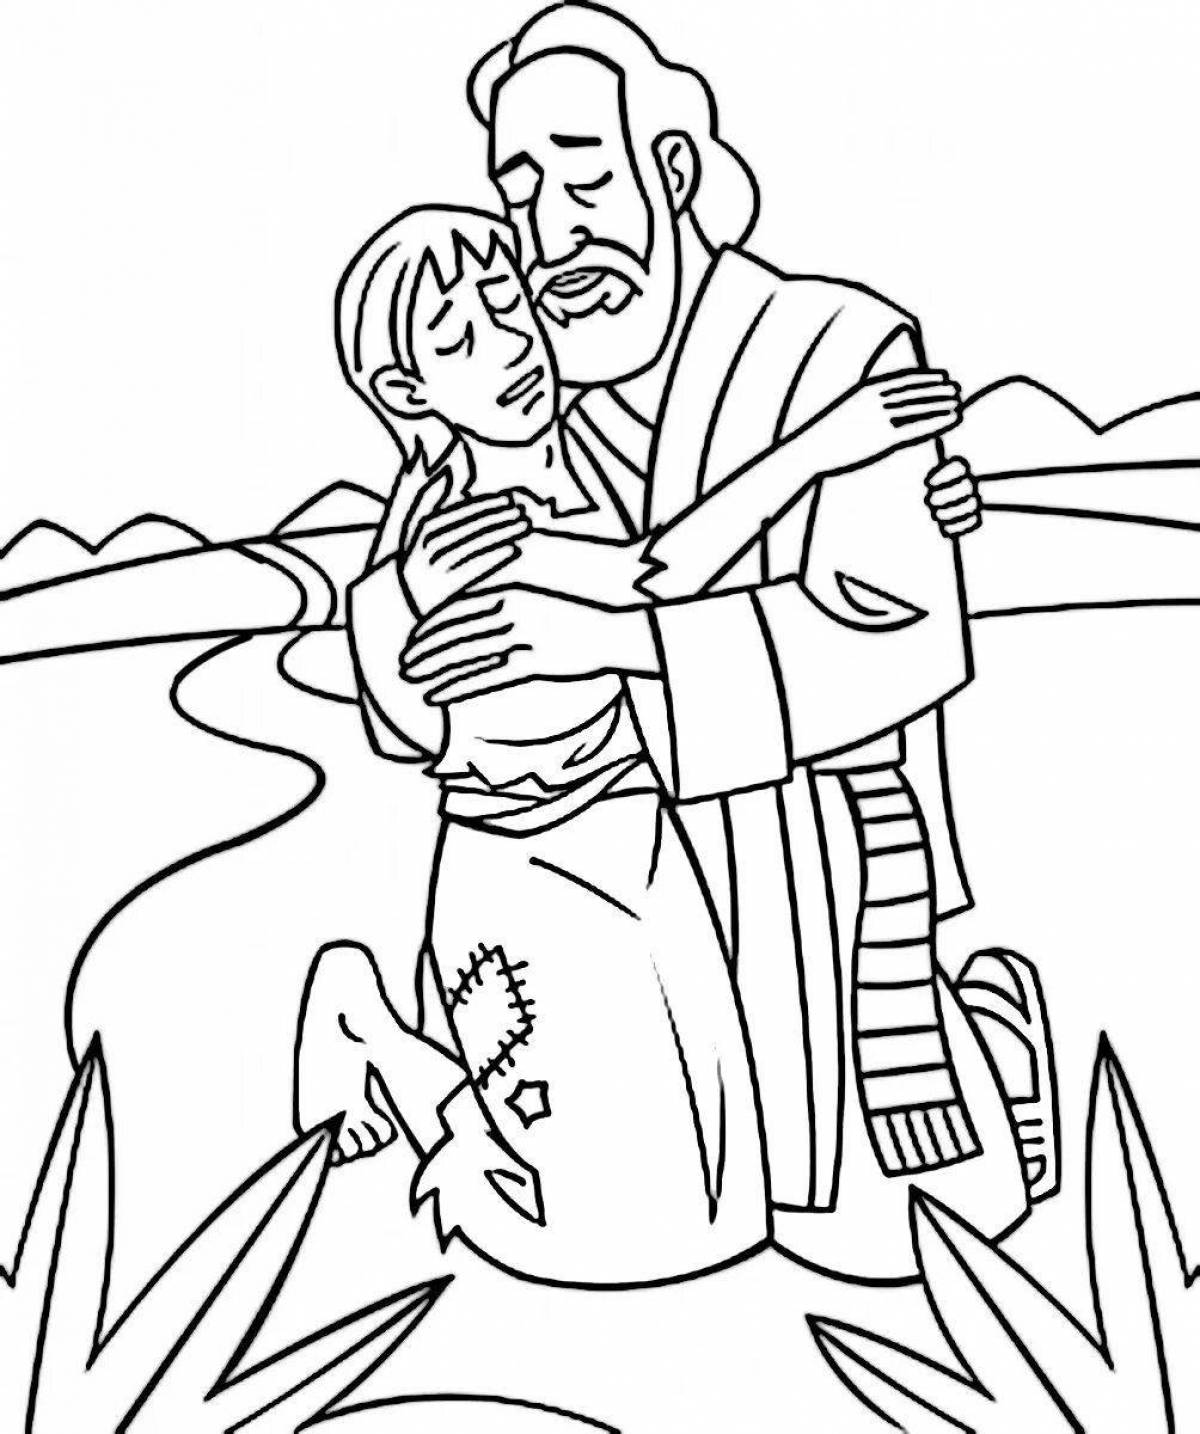 Coloring page of glorious prodigal son week